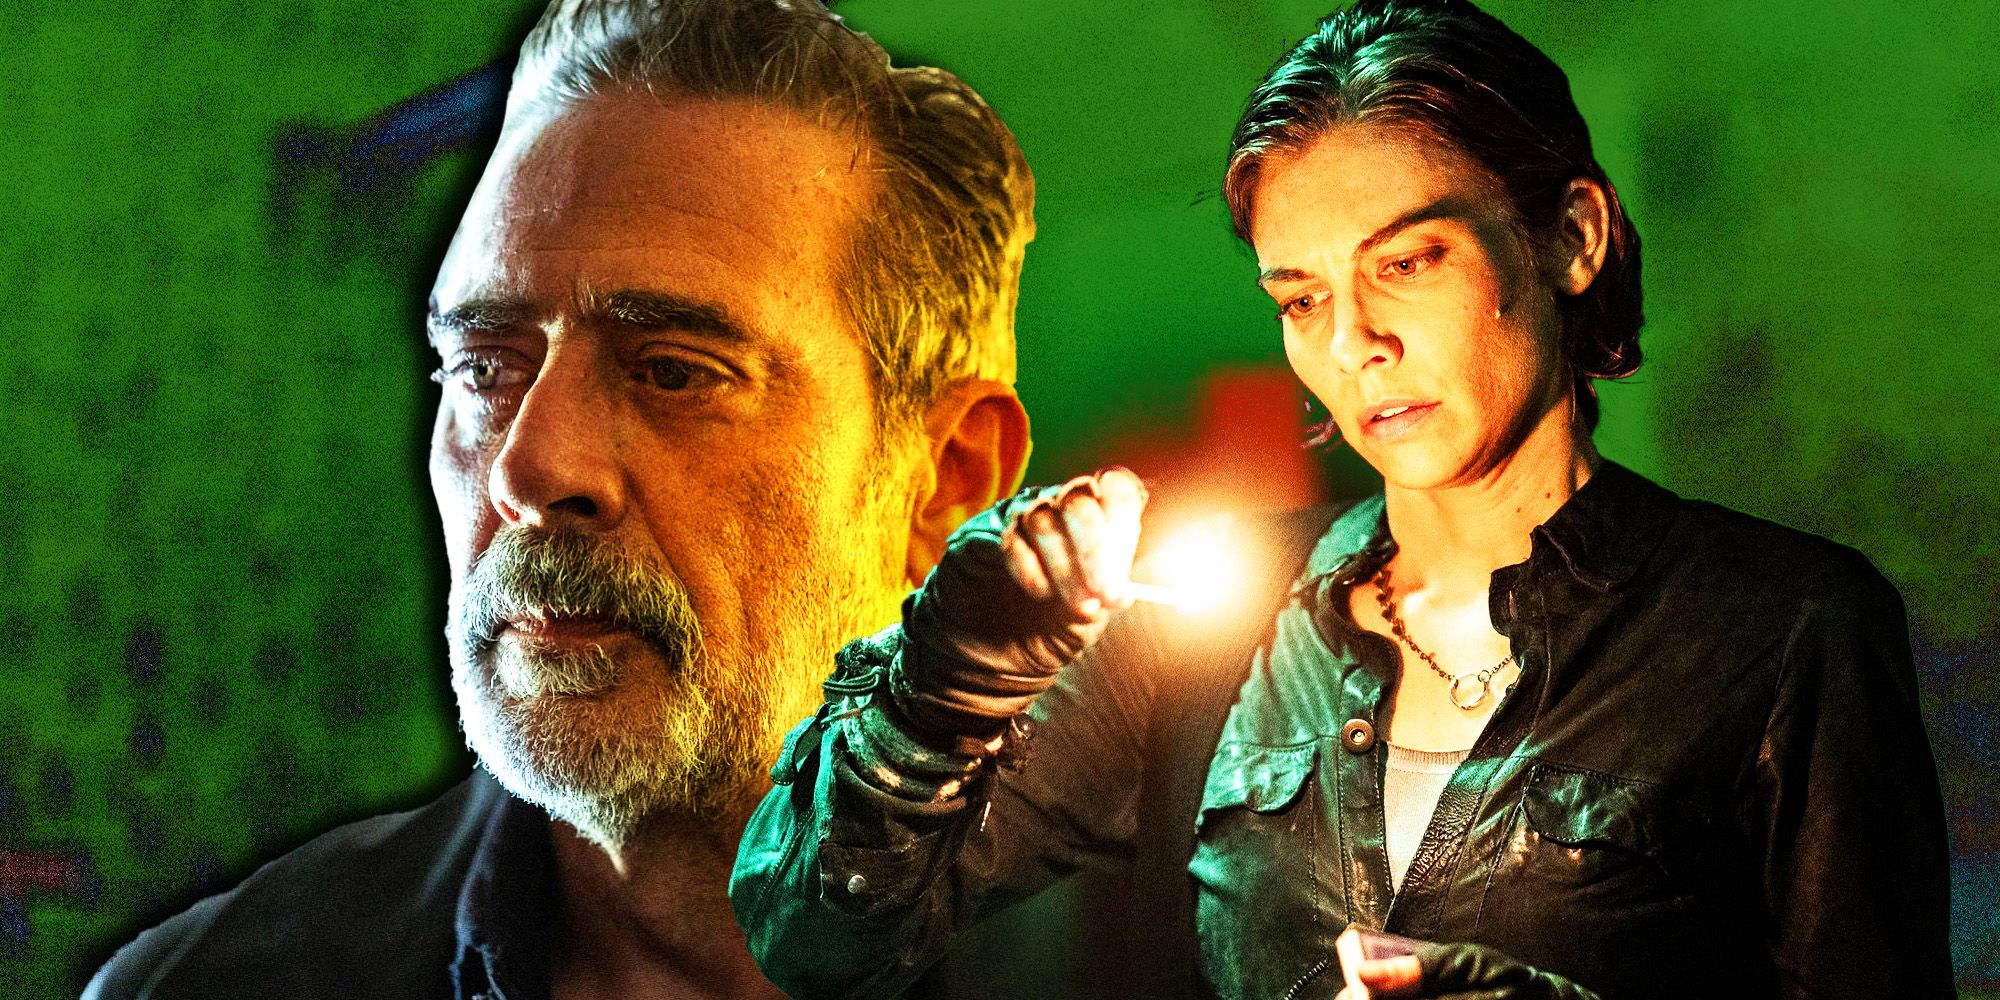 Custom image of Negan looking sad and Maggie lighting a match in Dead City